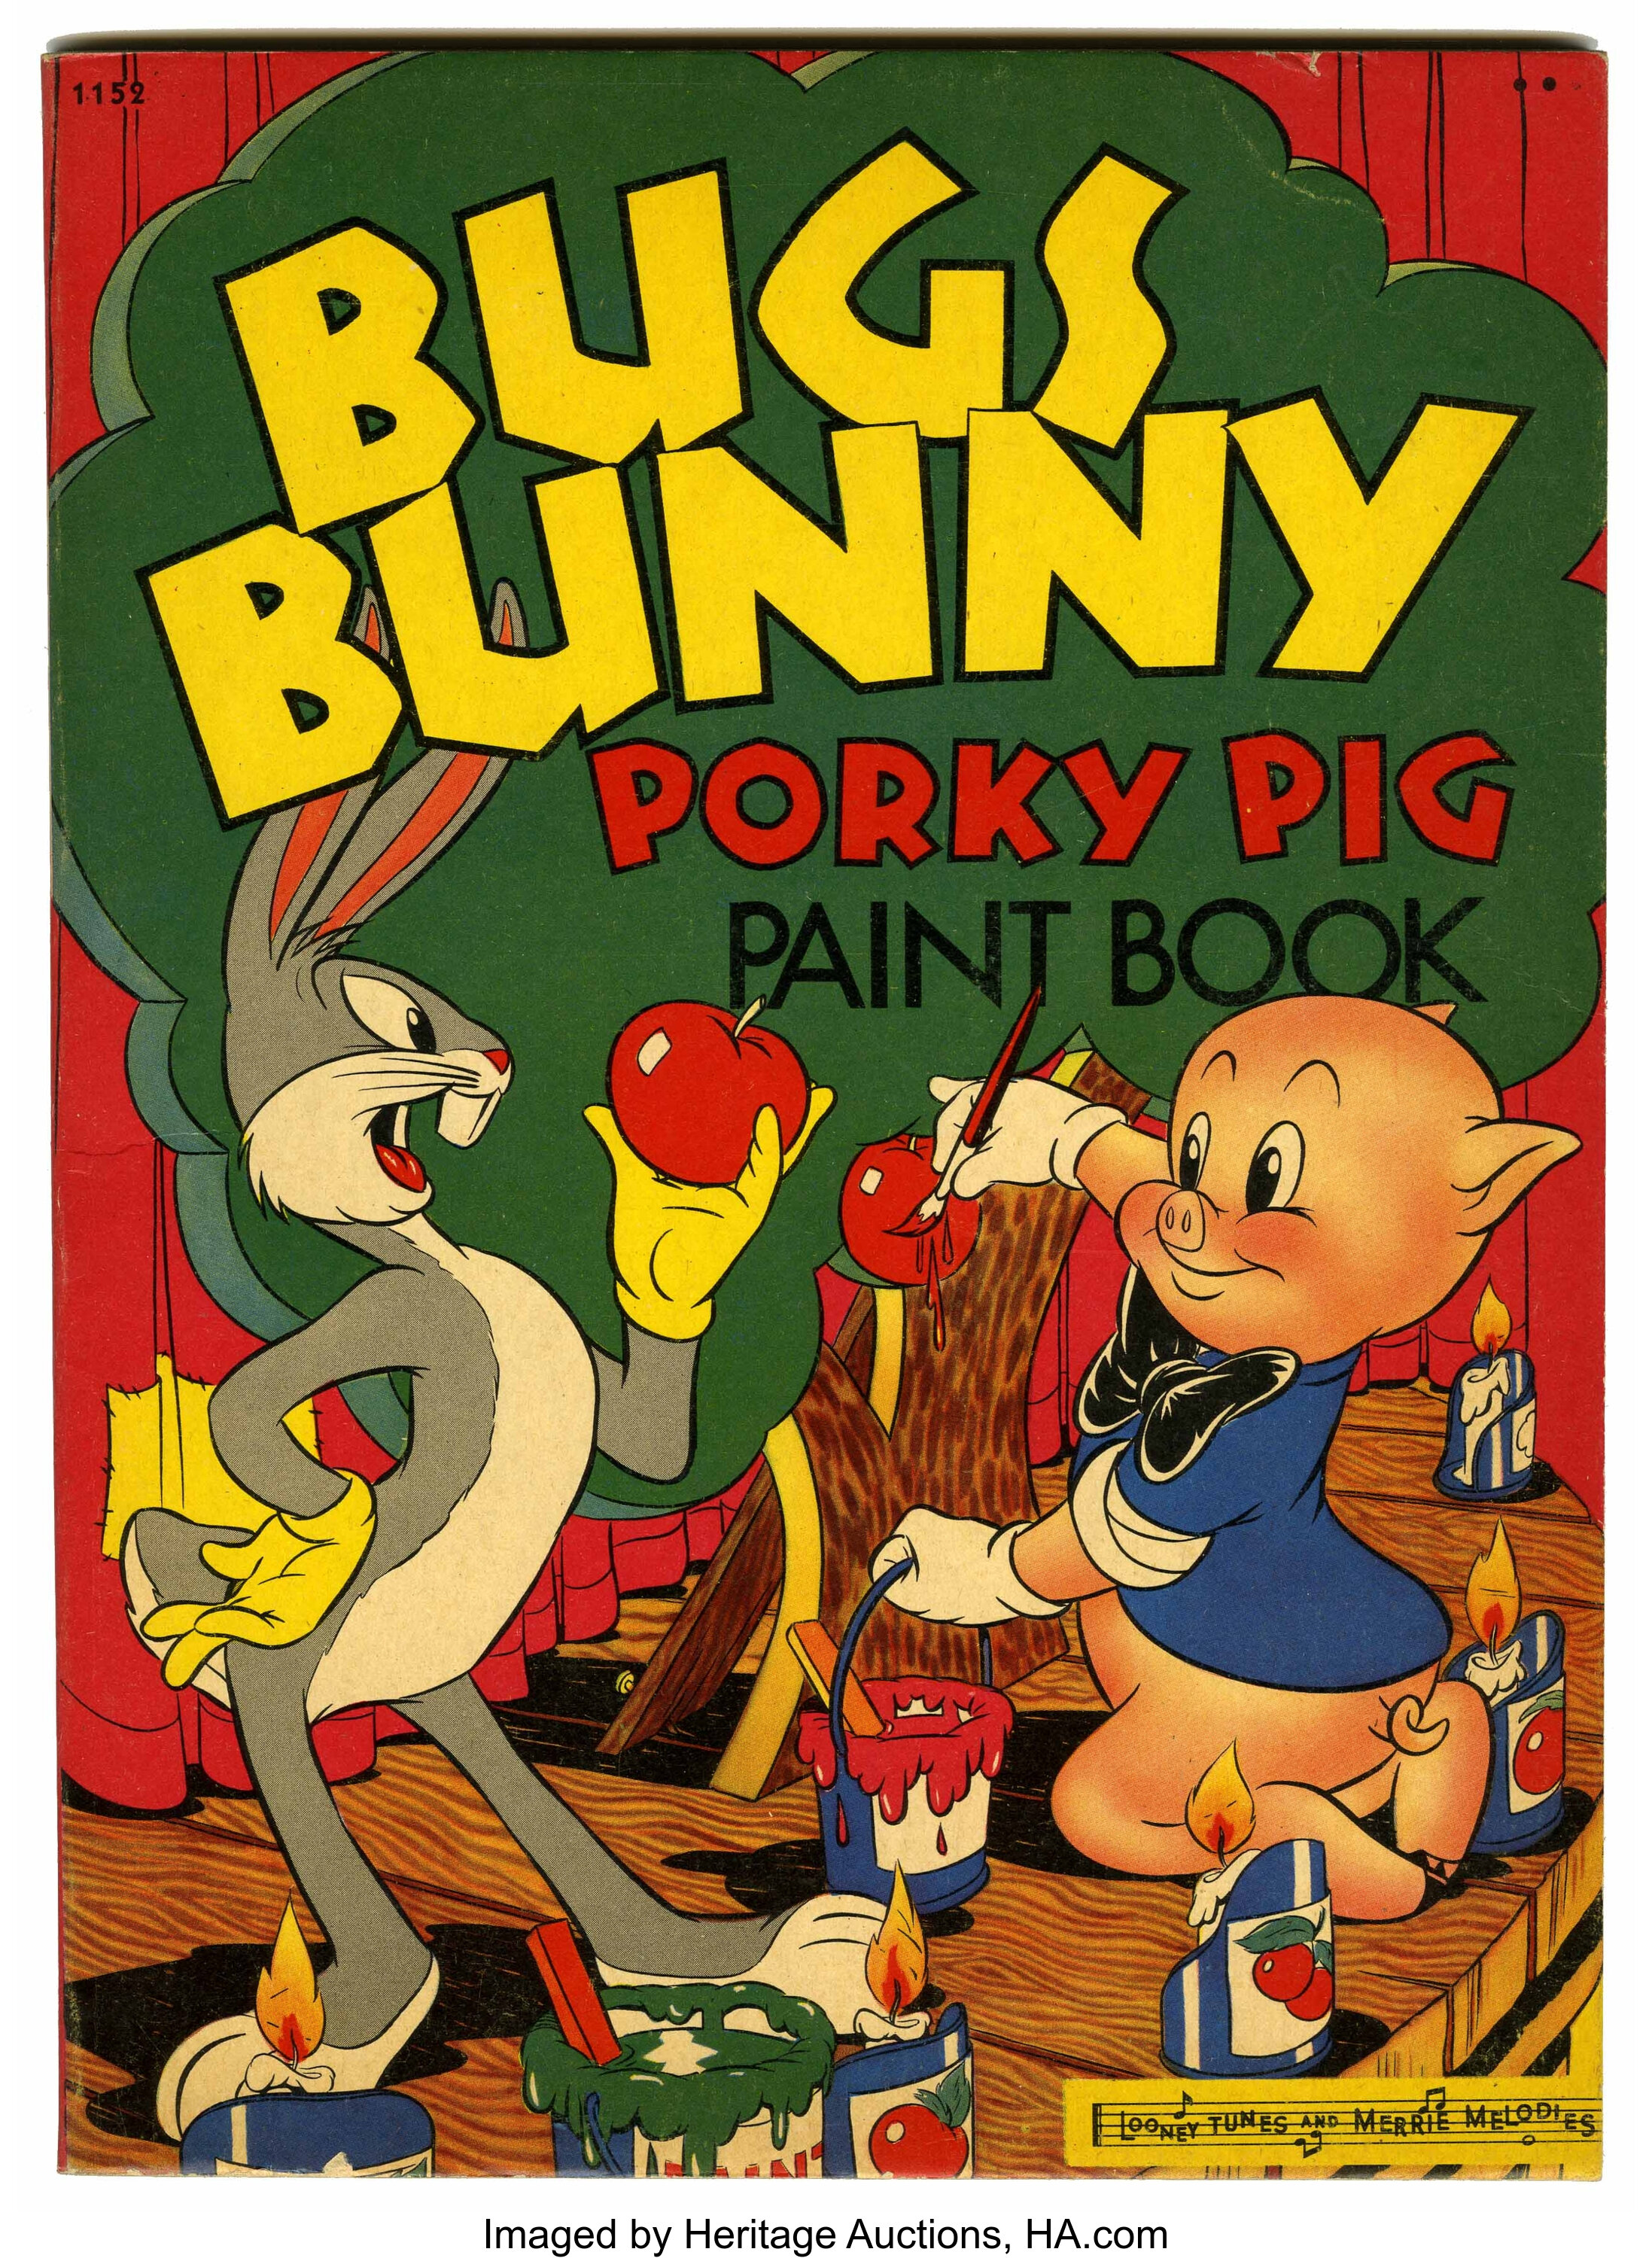 Bugs Bunny and Porky Pig the Most Daring Young Fellow I'm an Artist  Storybook Watercolor Paint Book 1980 -  Israel